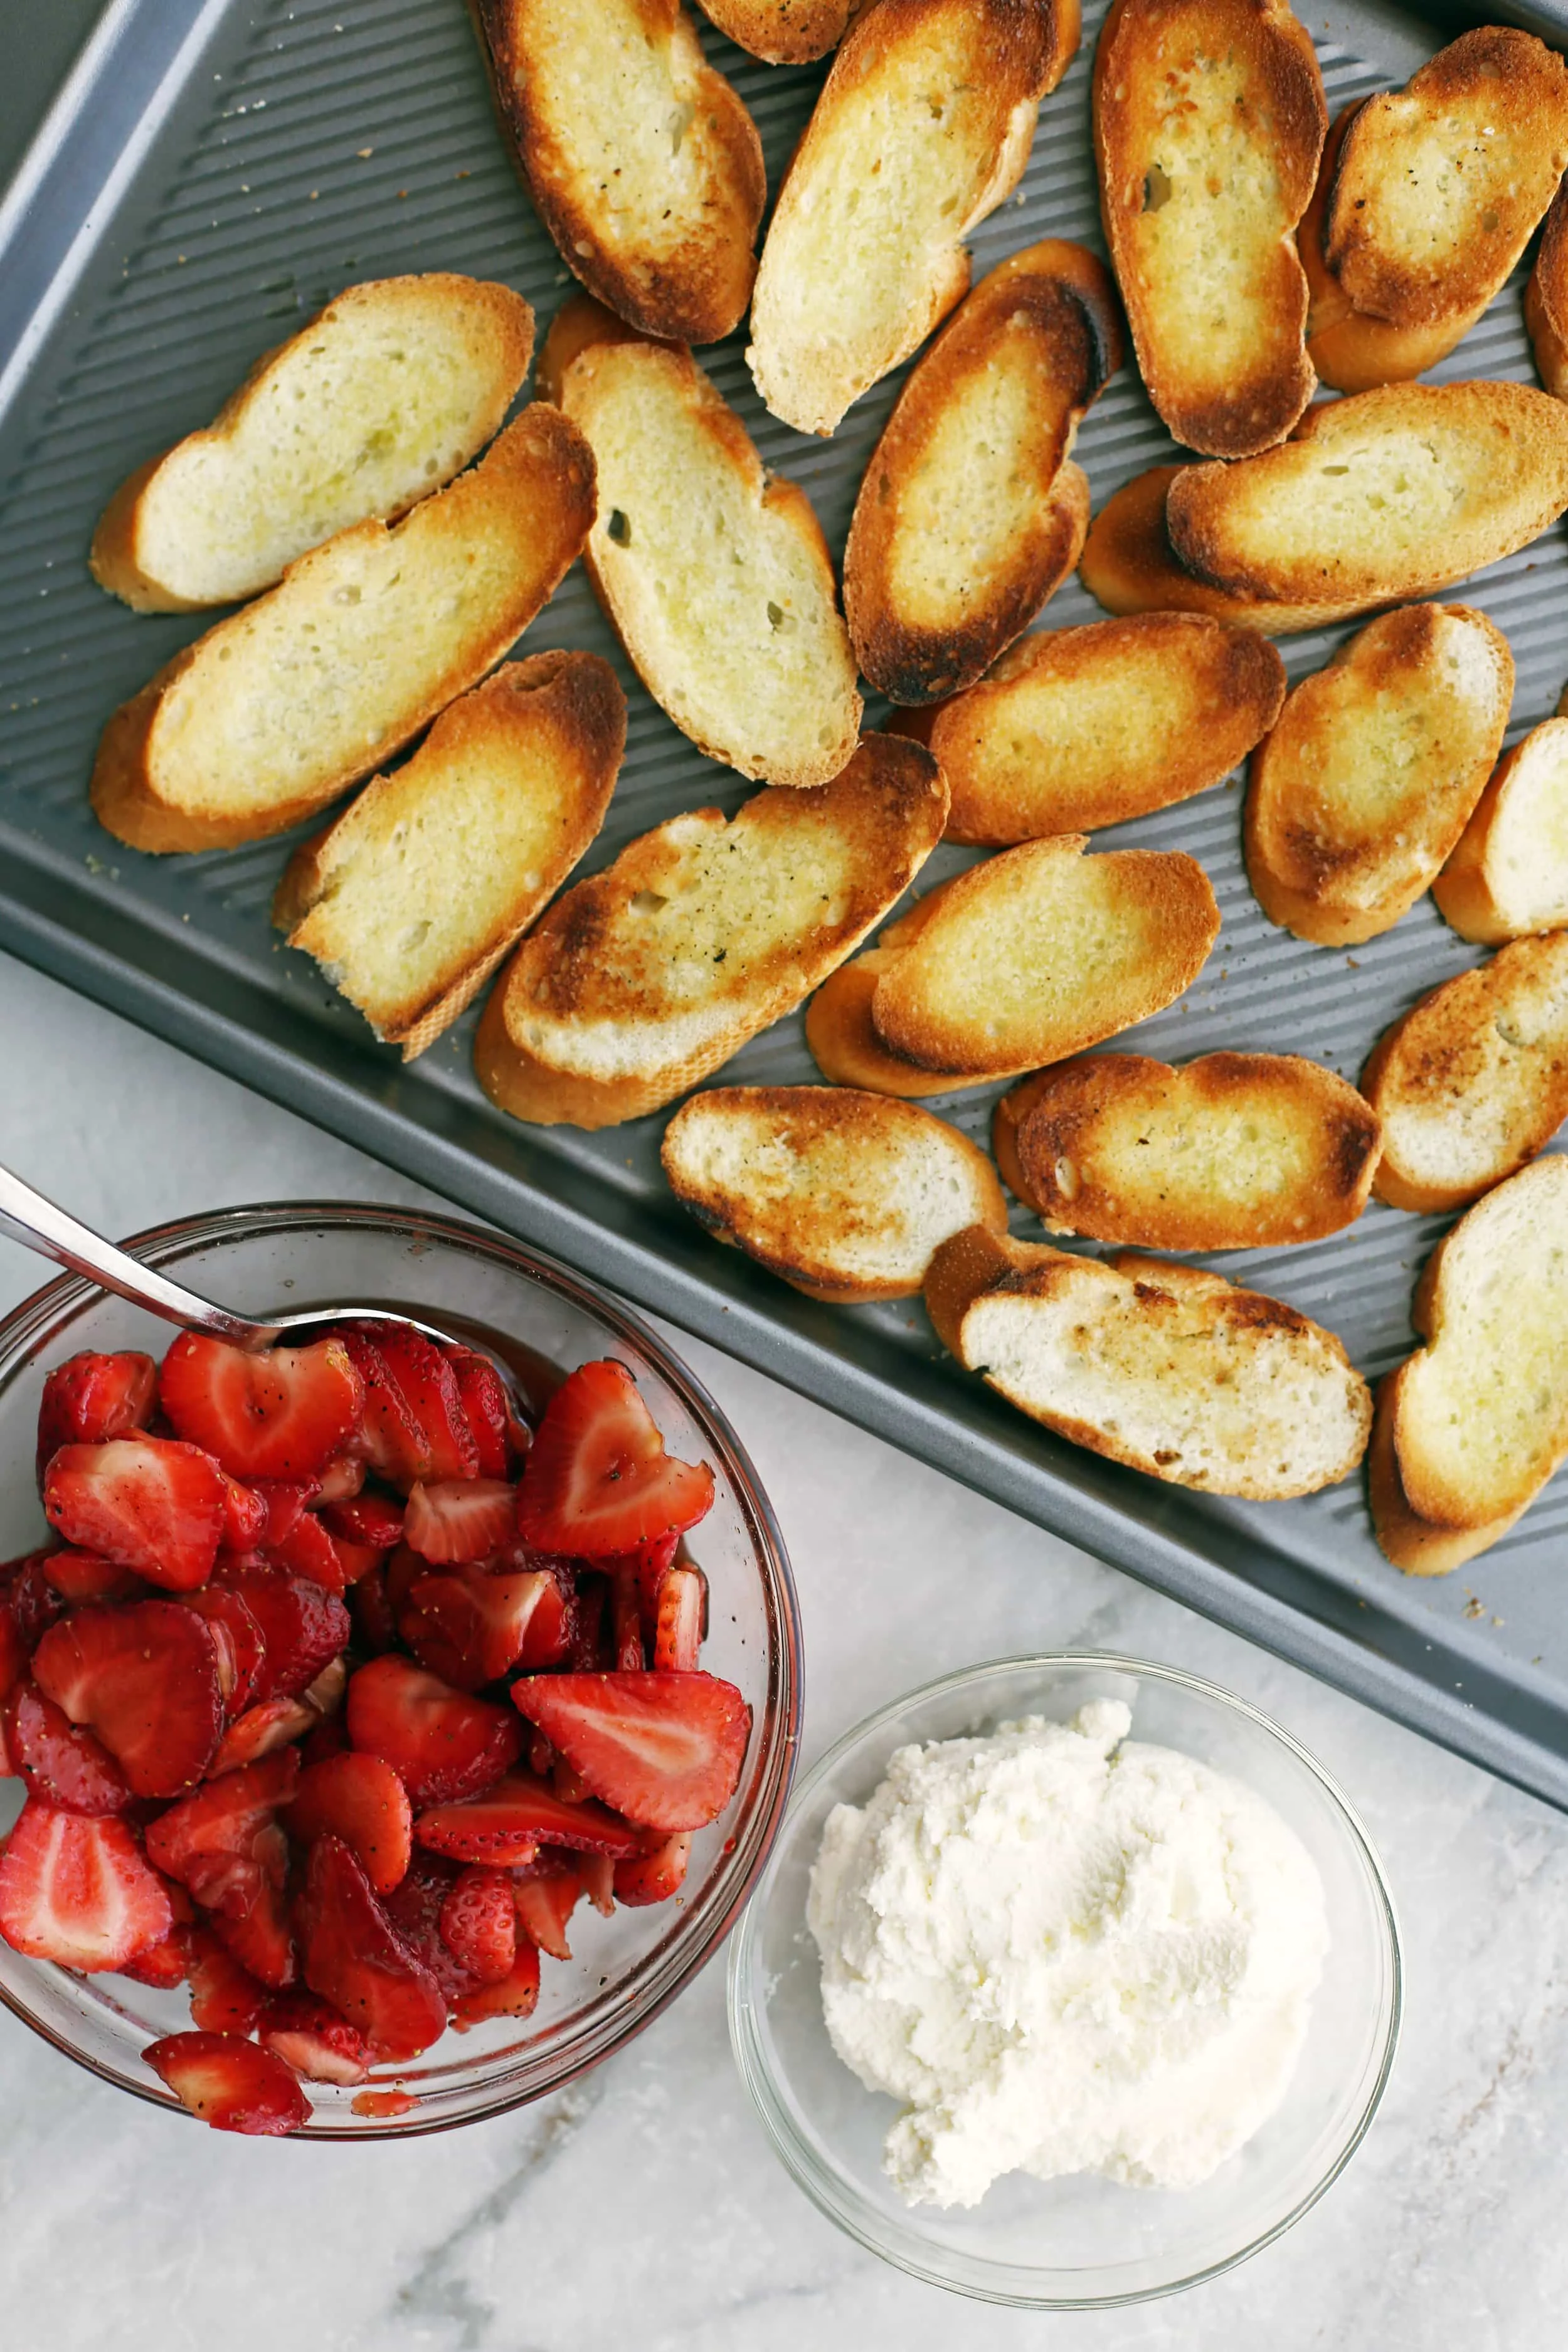 Toasted baguette slices on a baking sheet, a bowl of balsamic strawberries, and a bowl of ricotta.